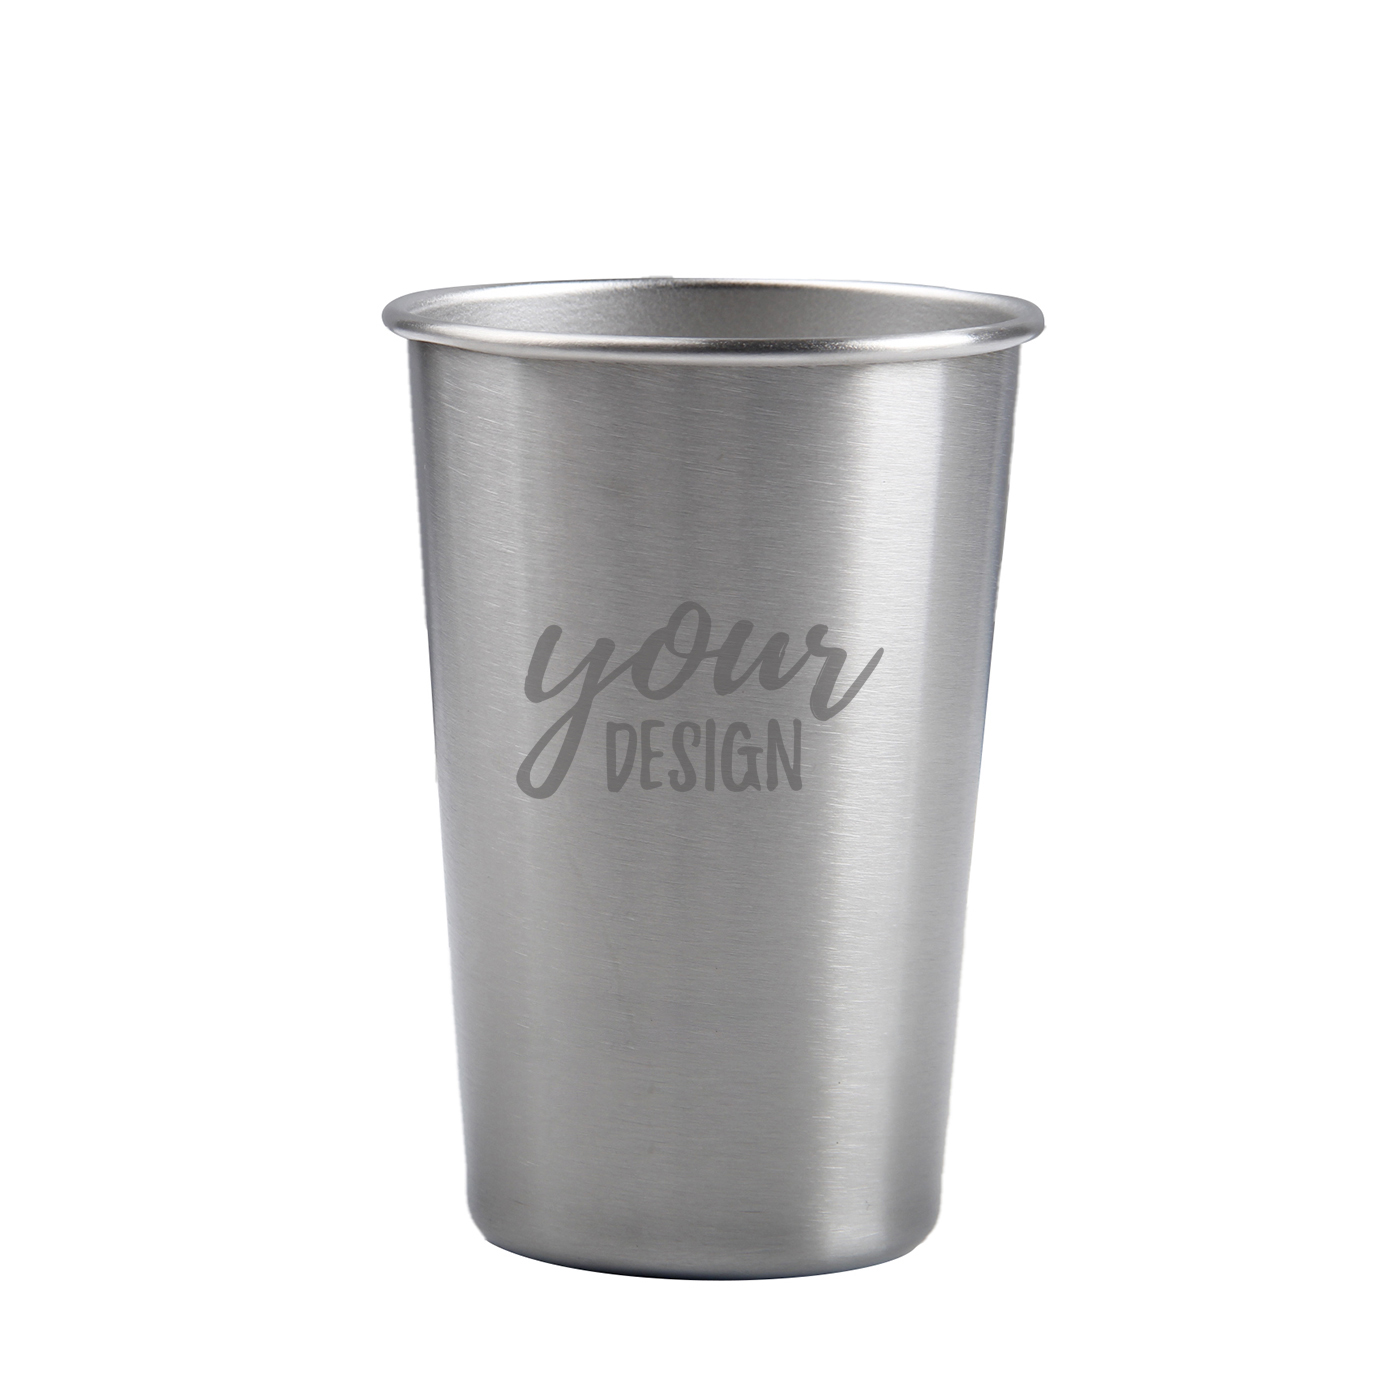 6 oz. Stainless Steel Pint Drinking Cup1